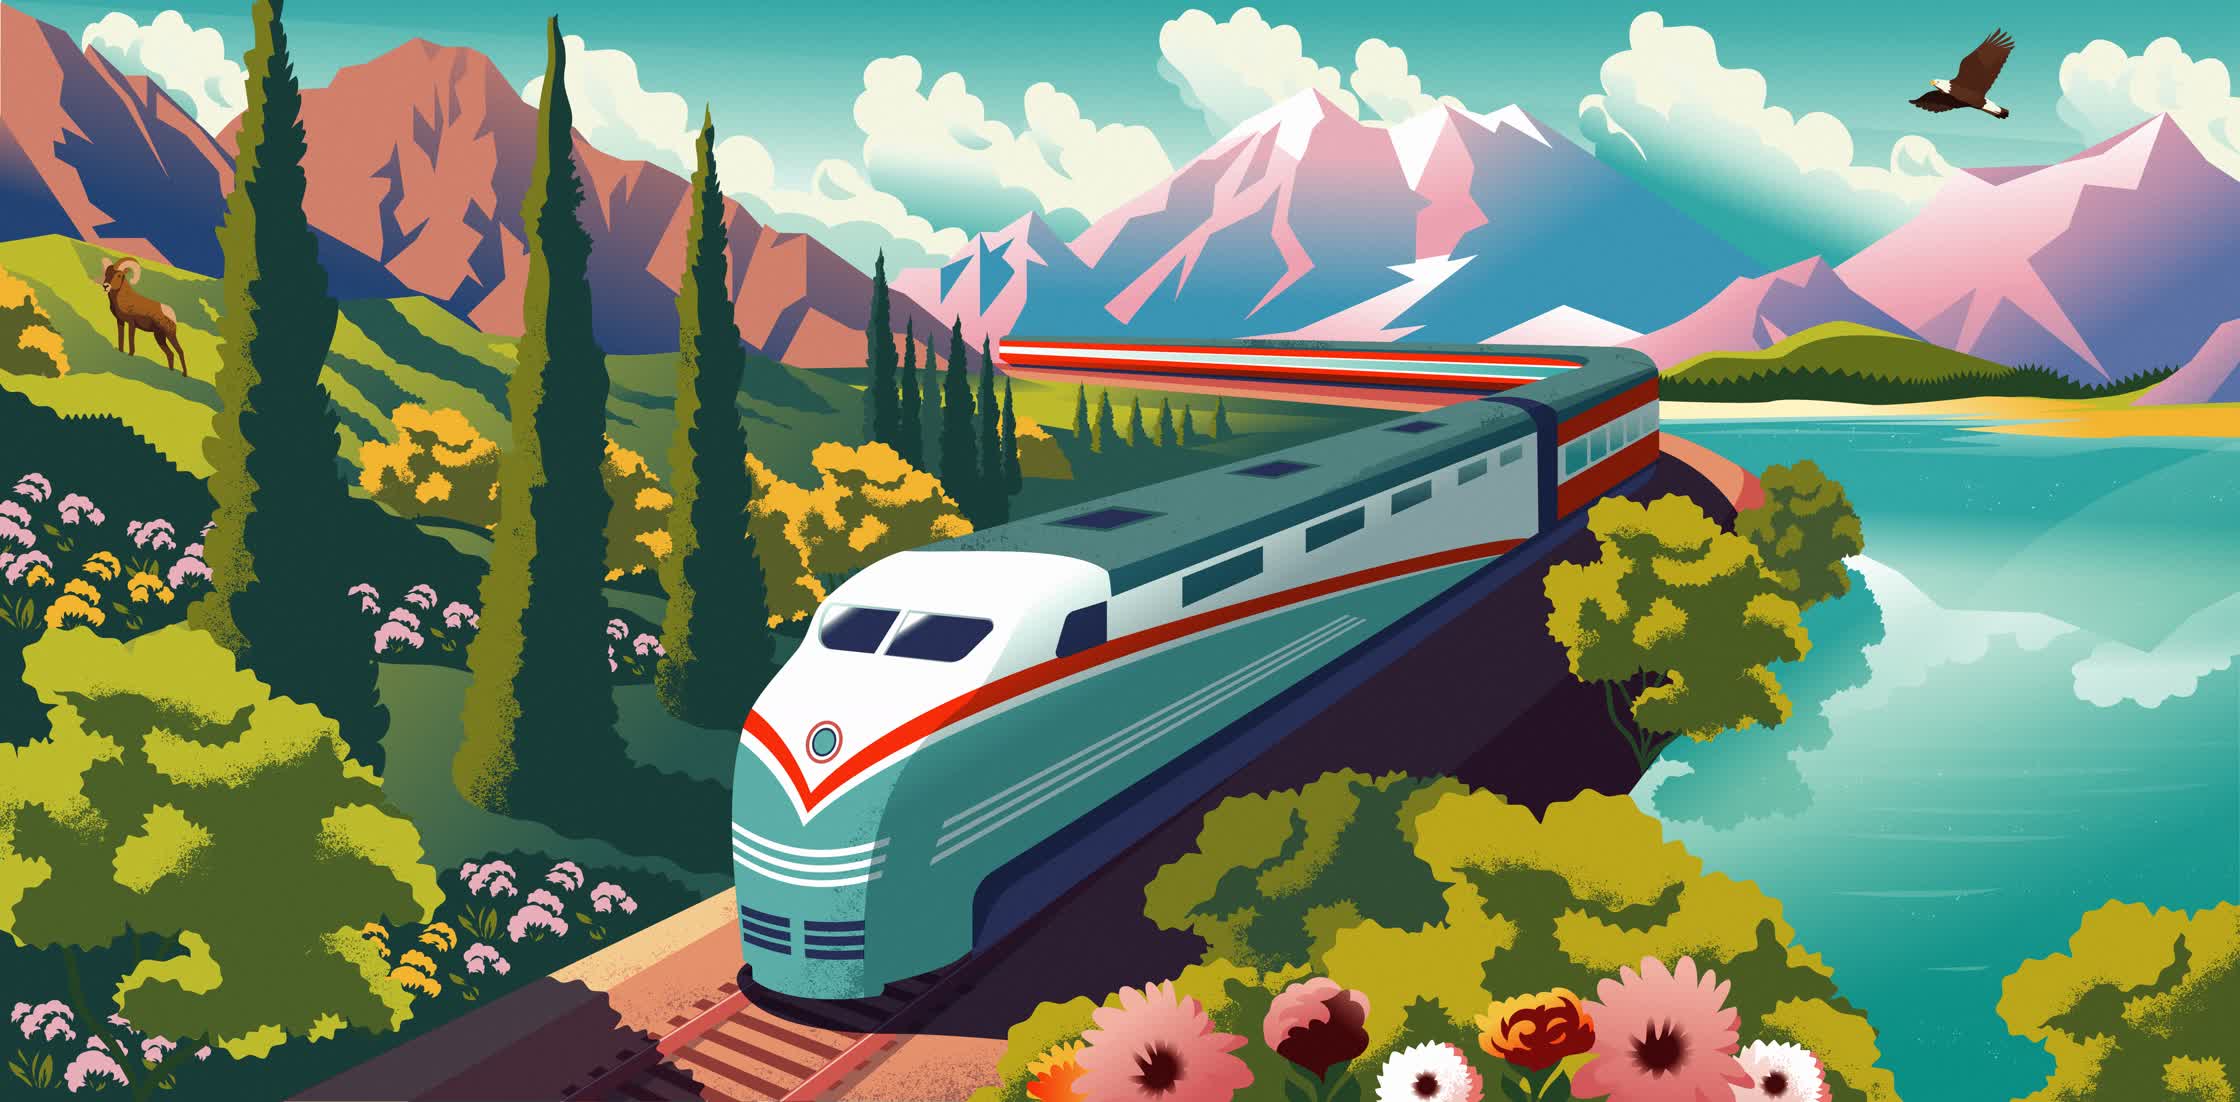 Fifty Grande Magazine - editorial illustration - Ode to Trains.jpg